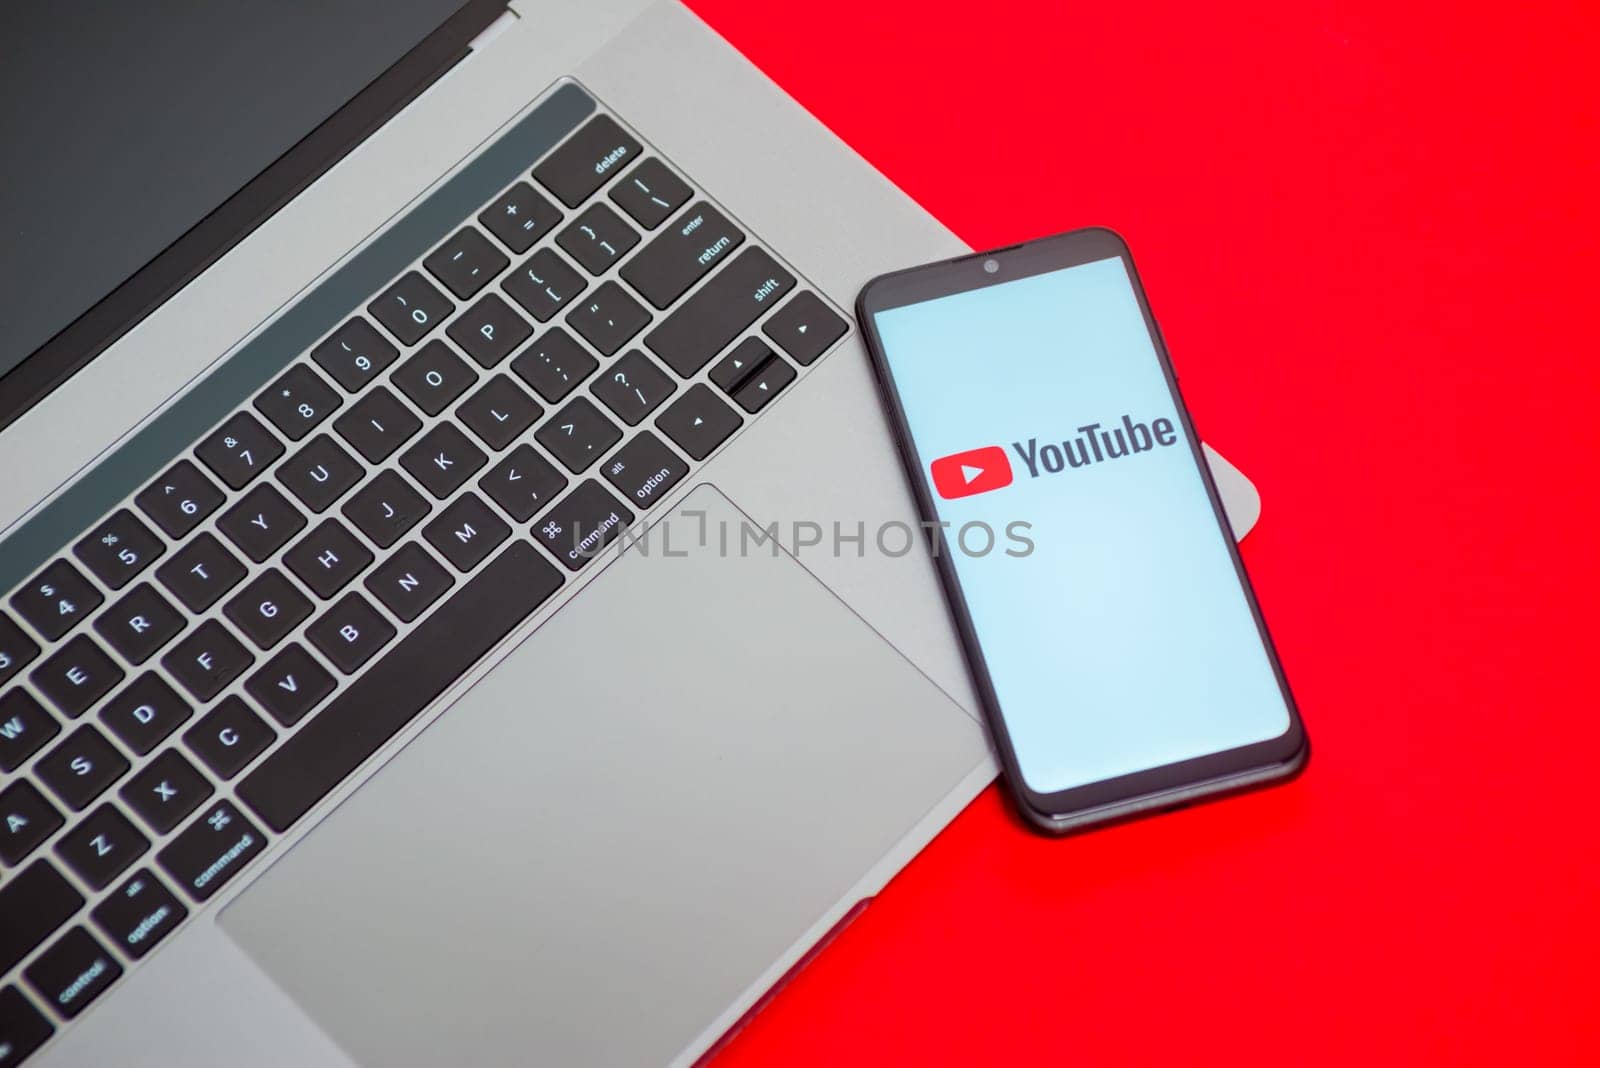 Tula, Russia - May 18,2020: Modern Smartphone with Youtube logo on the screen.